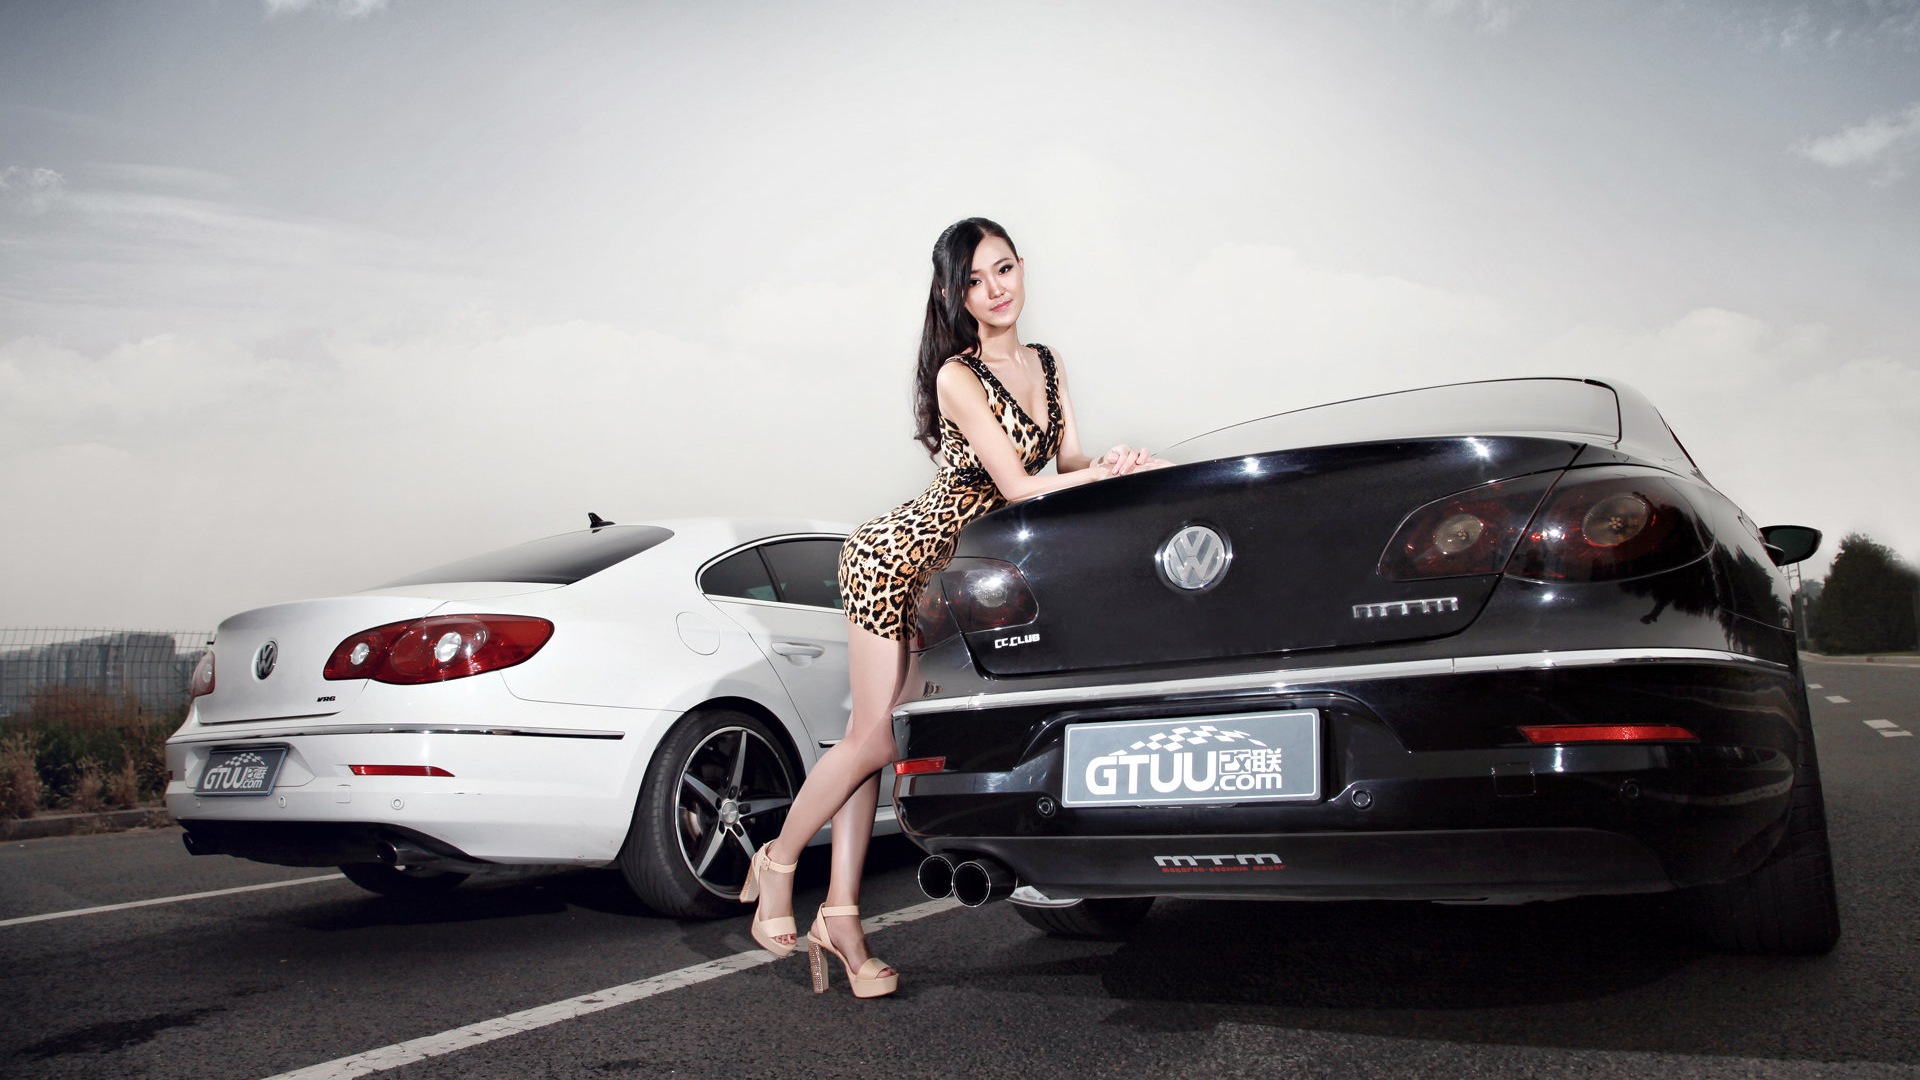 Beautiful leopard dress girl with Volkswagen sports car wallpapers #7 - 1920x1080